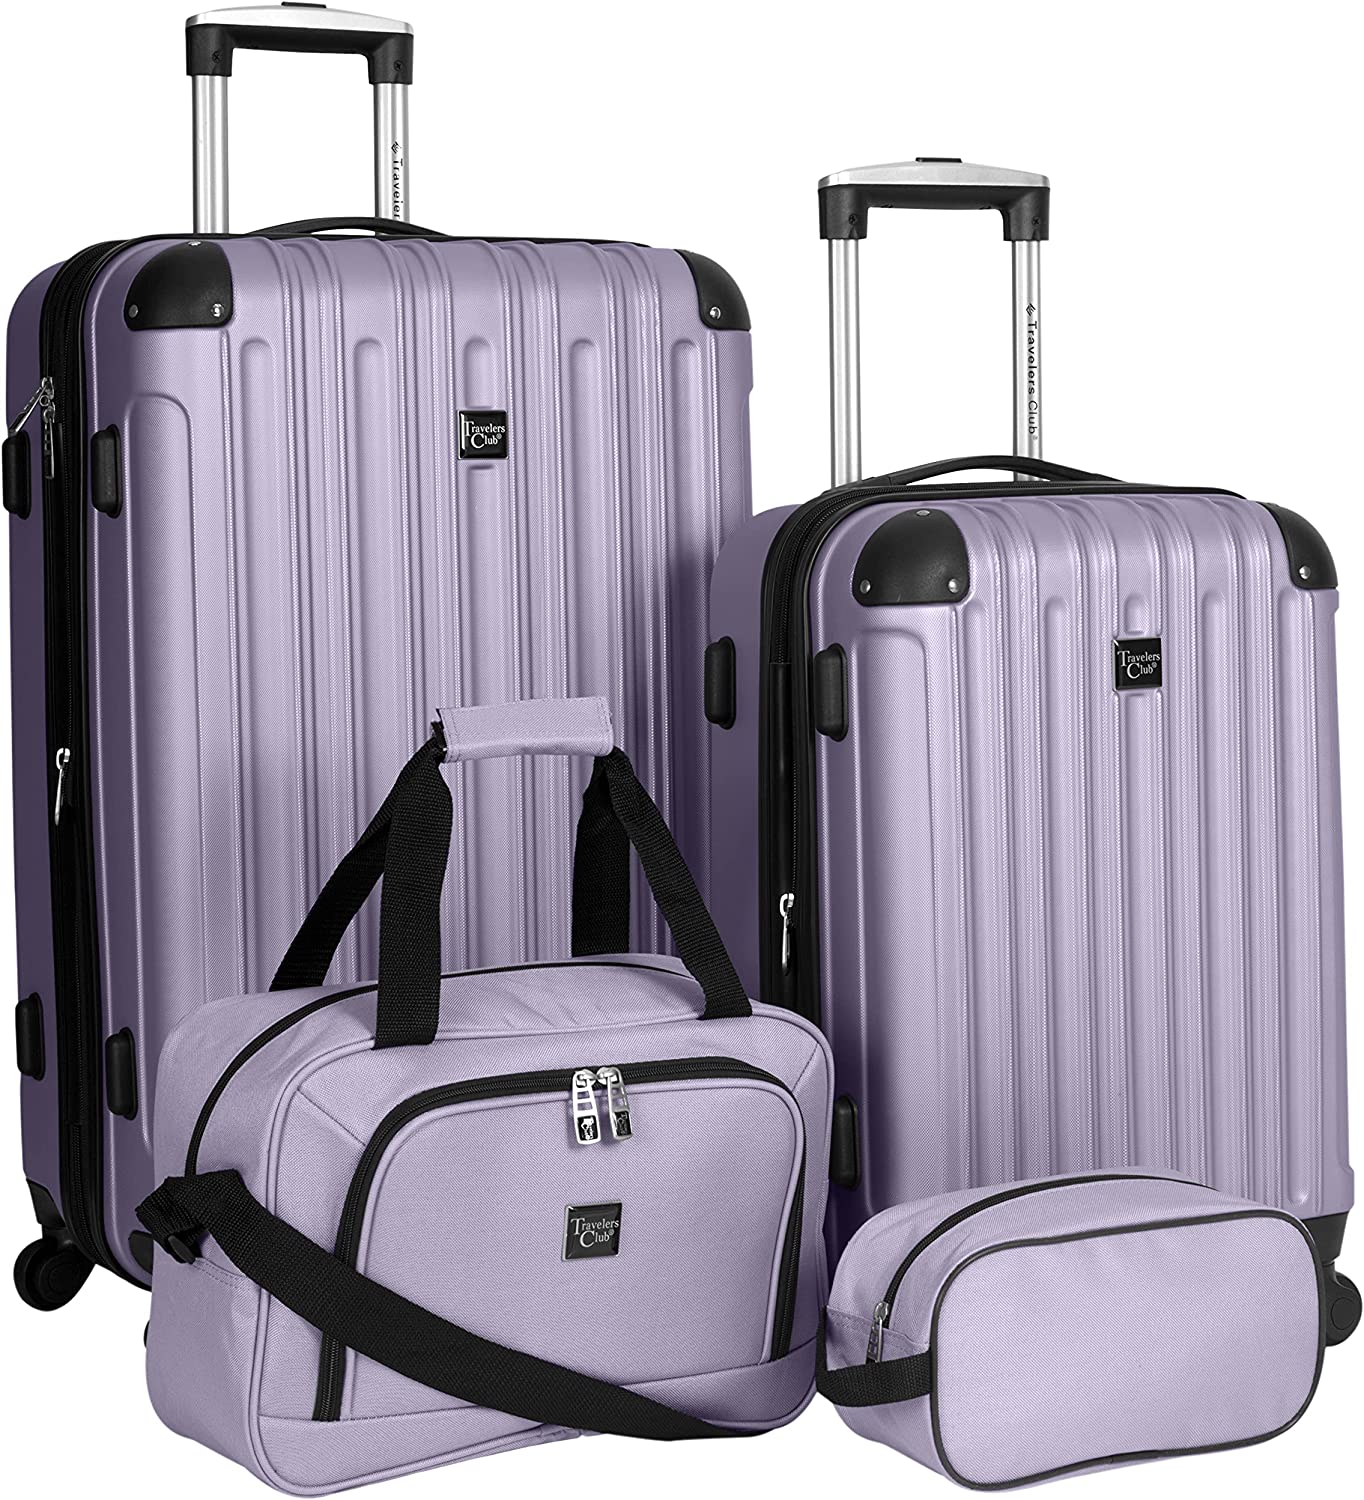 Travelers Club Midtown Fully-Lined Luggage Set, 4-Piece